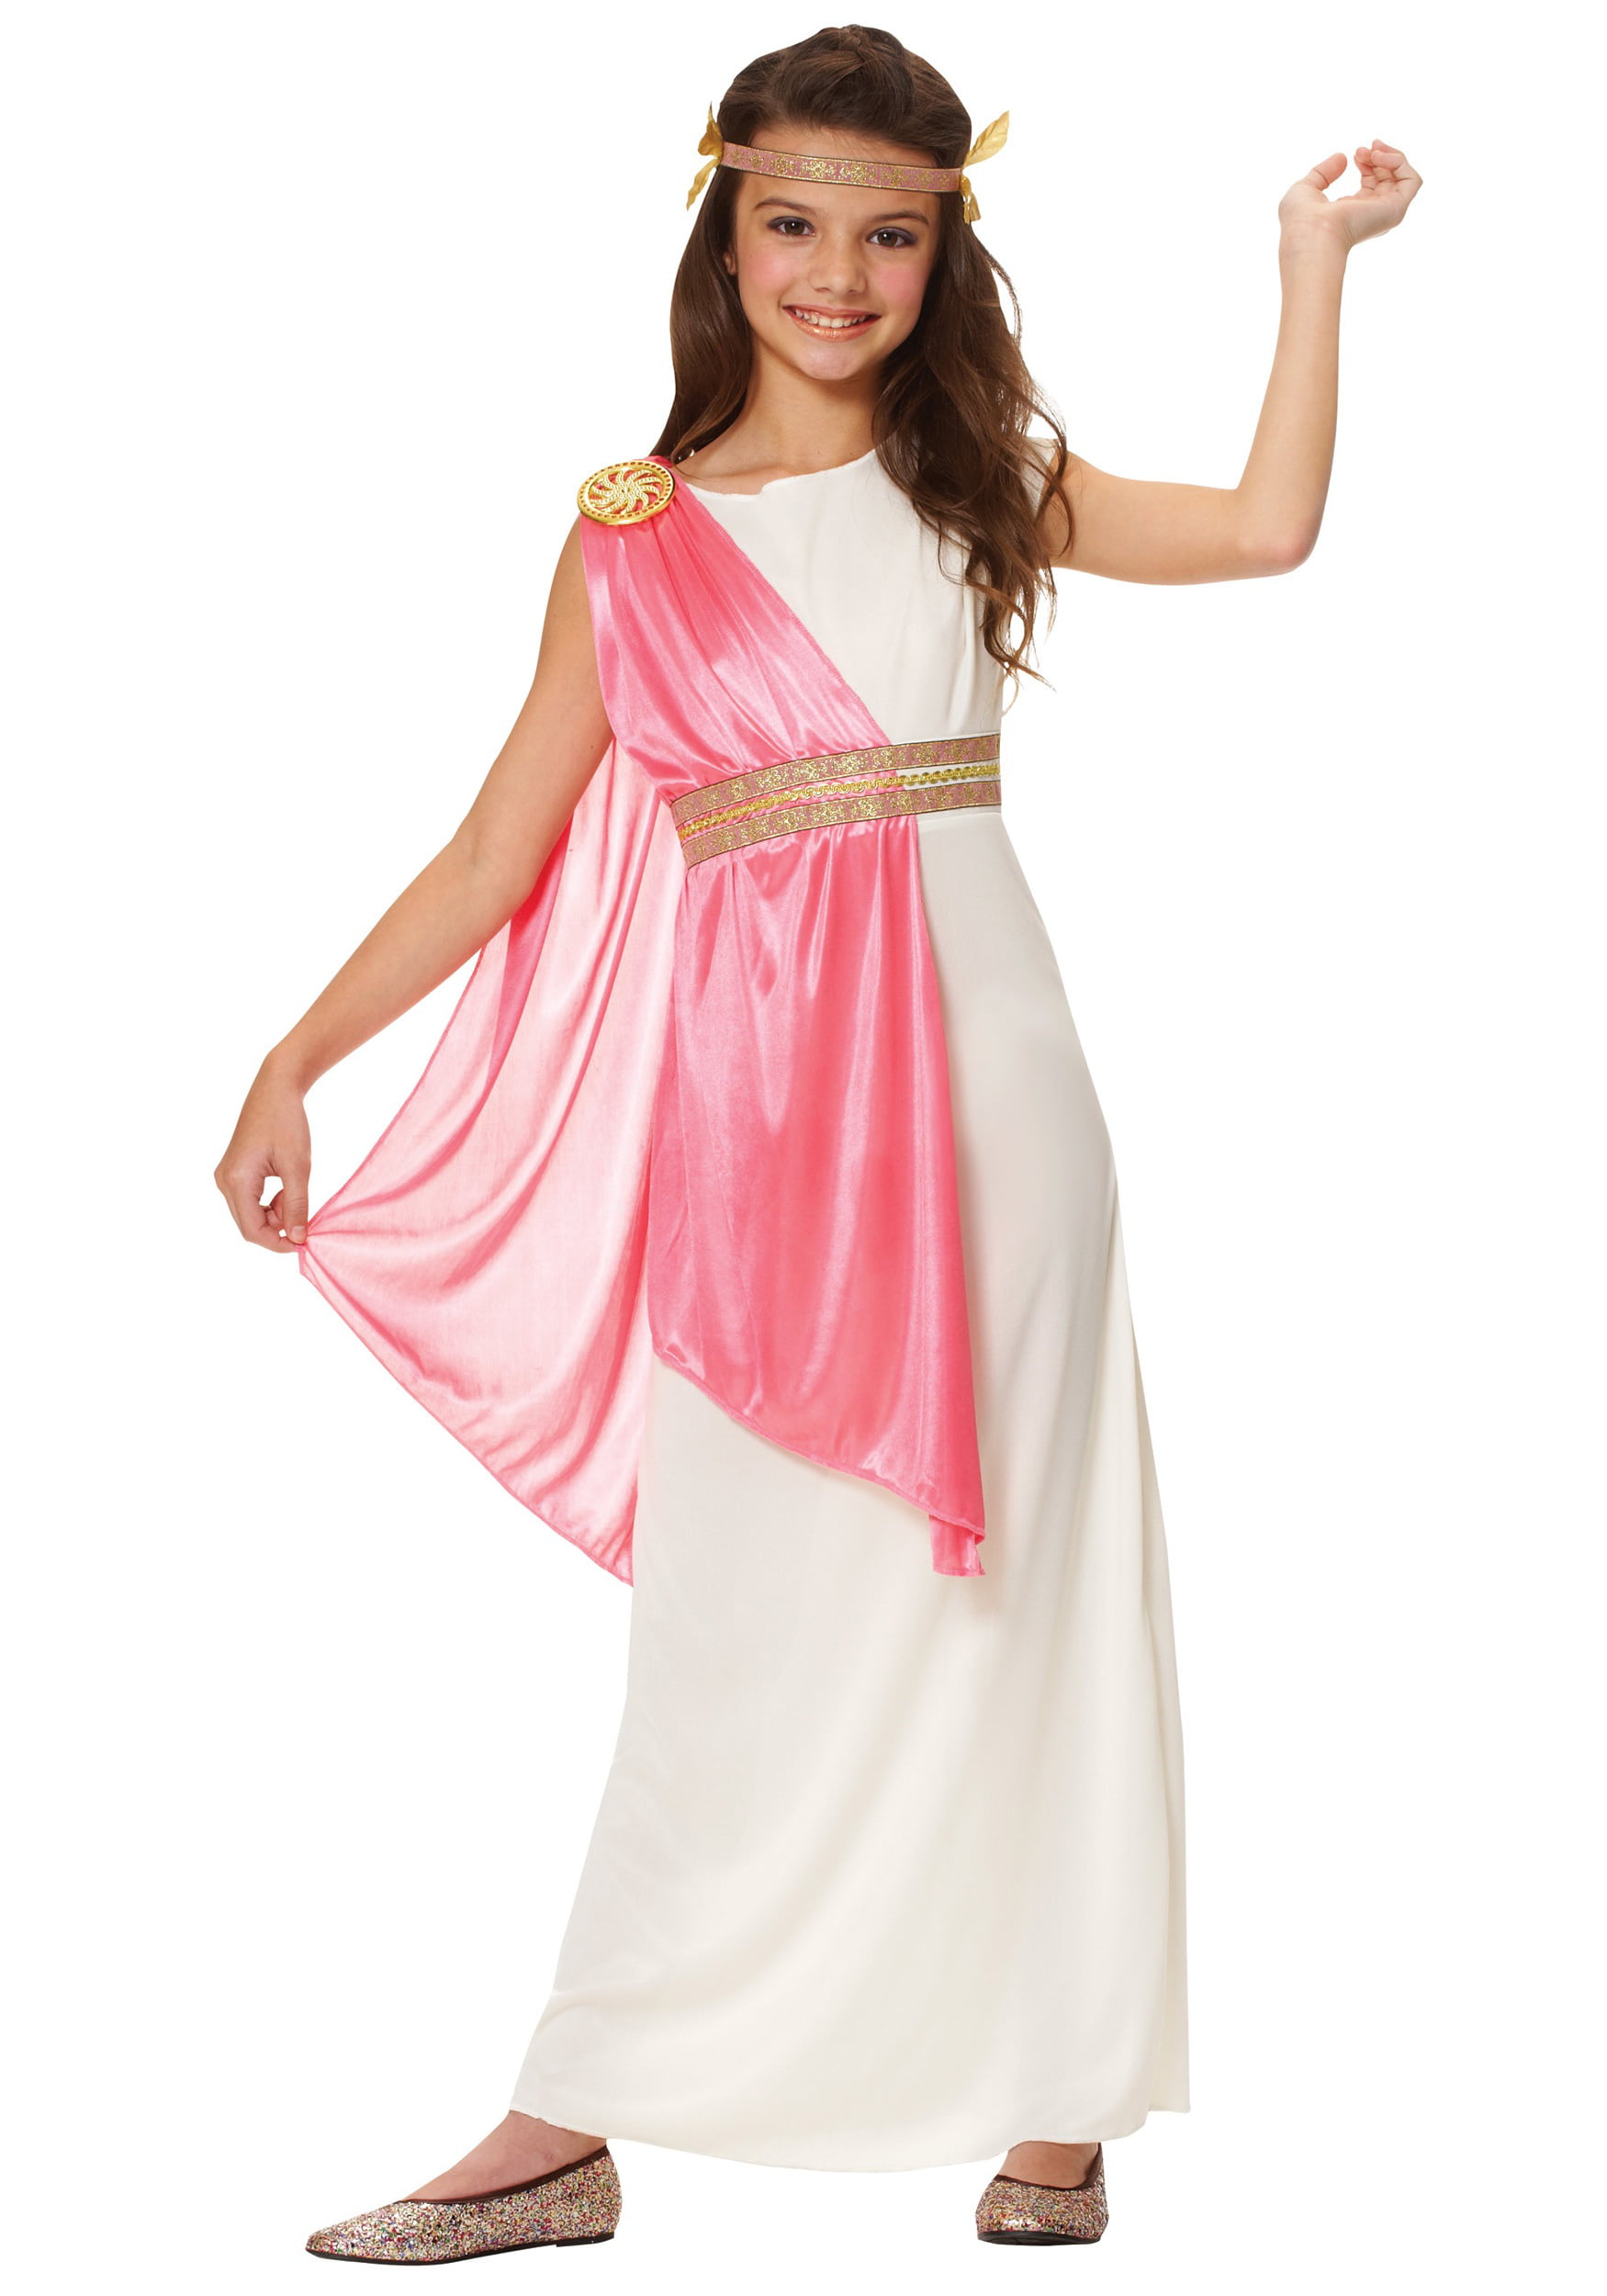 Men's Toga Roman Costume Greek Goddess God Halloween Party Role Play Clothes 